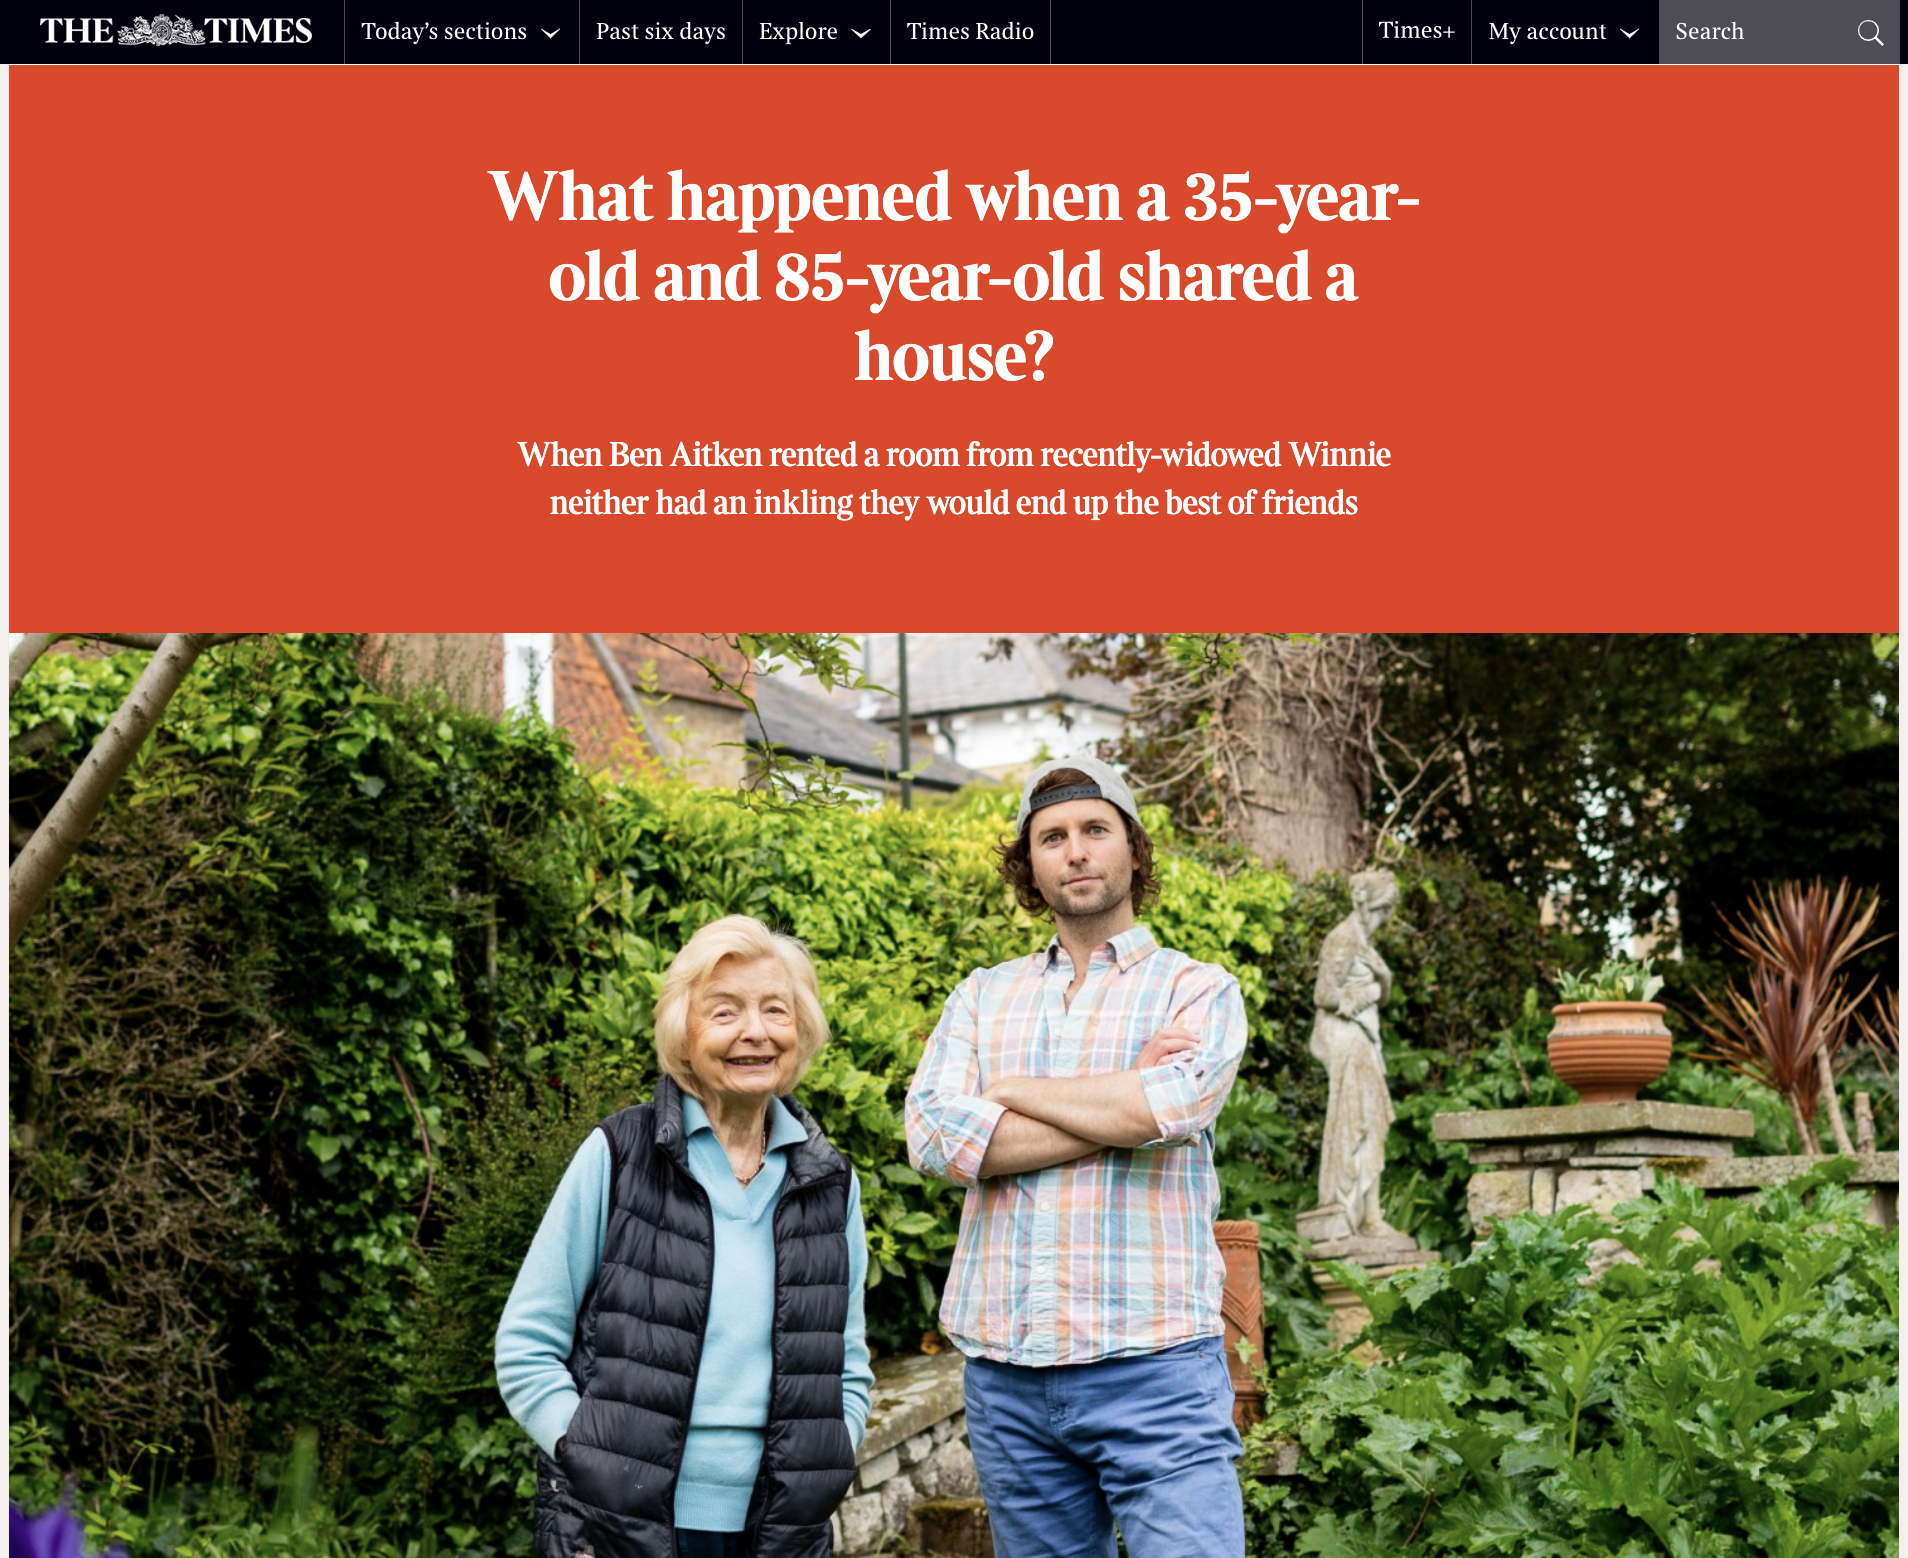 A screenshot of an article on The Times with a headline reading: What happened when a 35-year-old and 85-year-old shared a house?